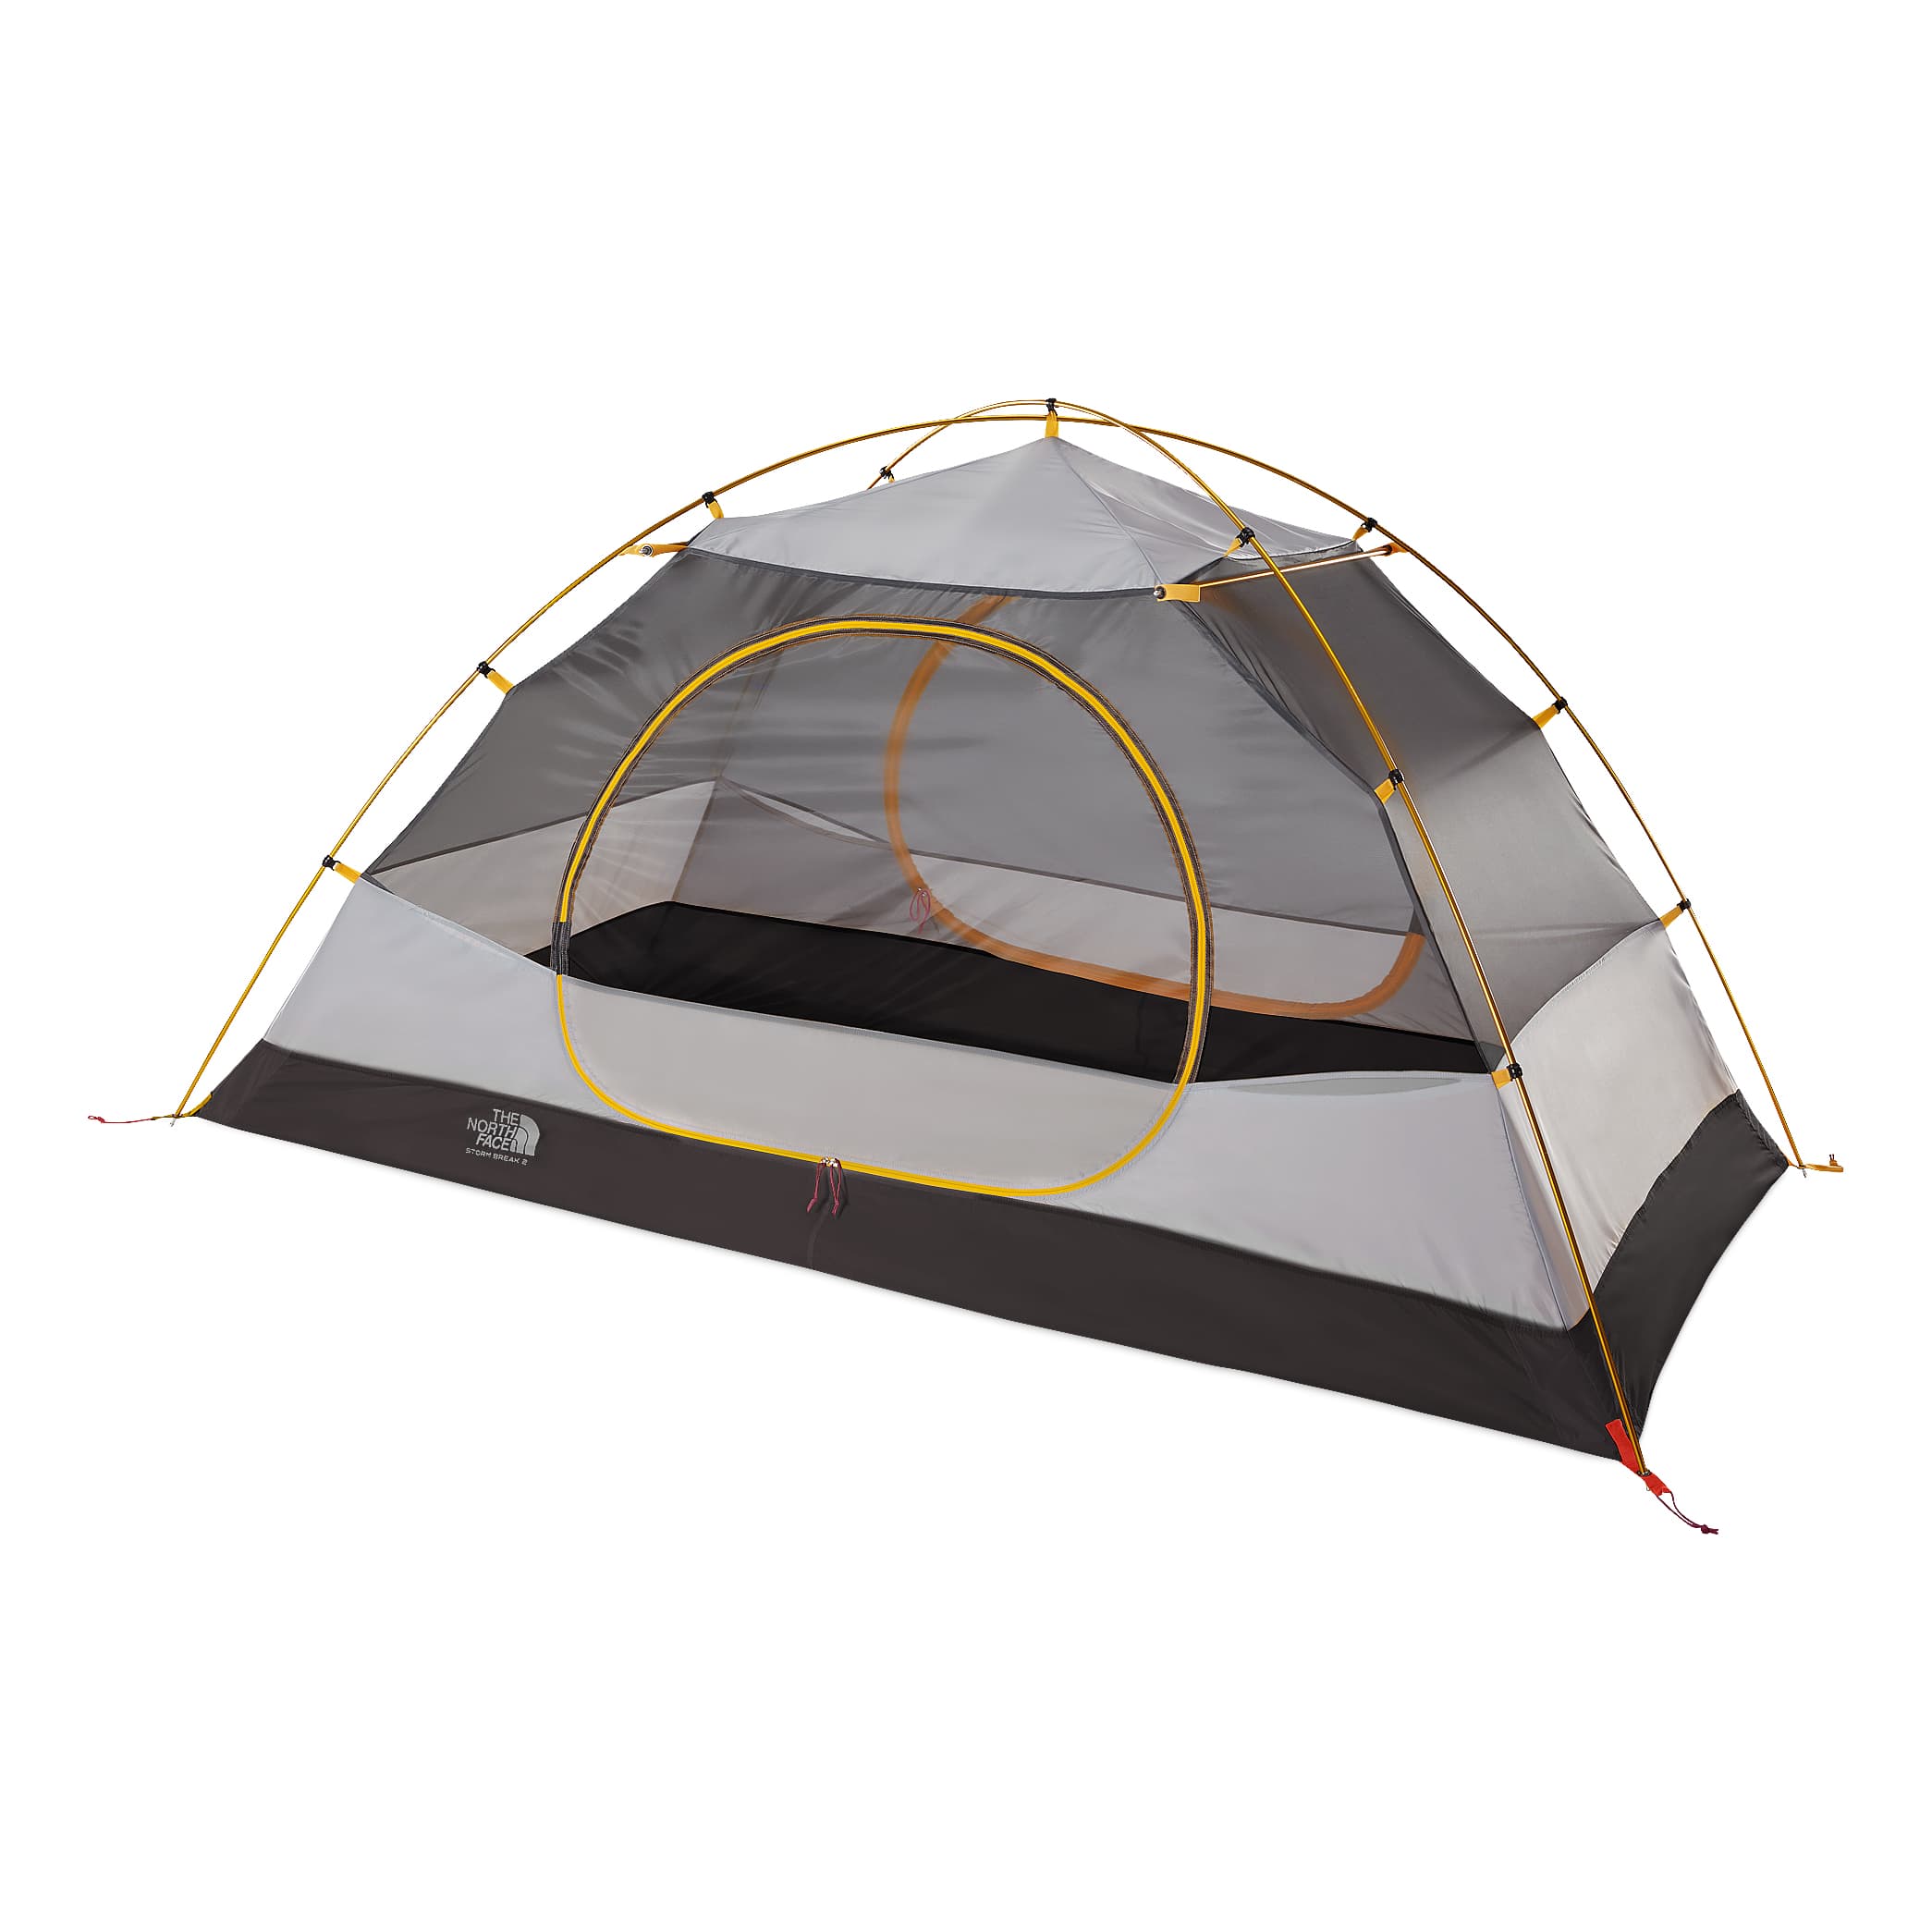 The North Face® Stormbreak Tents - Stormbreak 2 - Without Fly